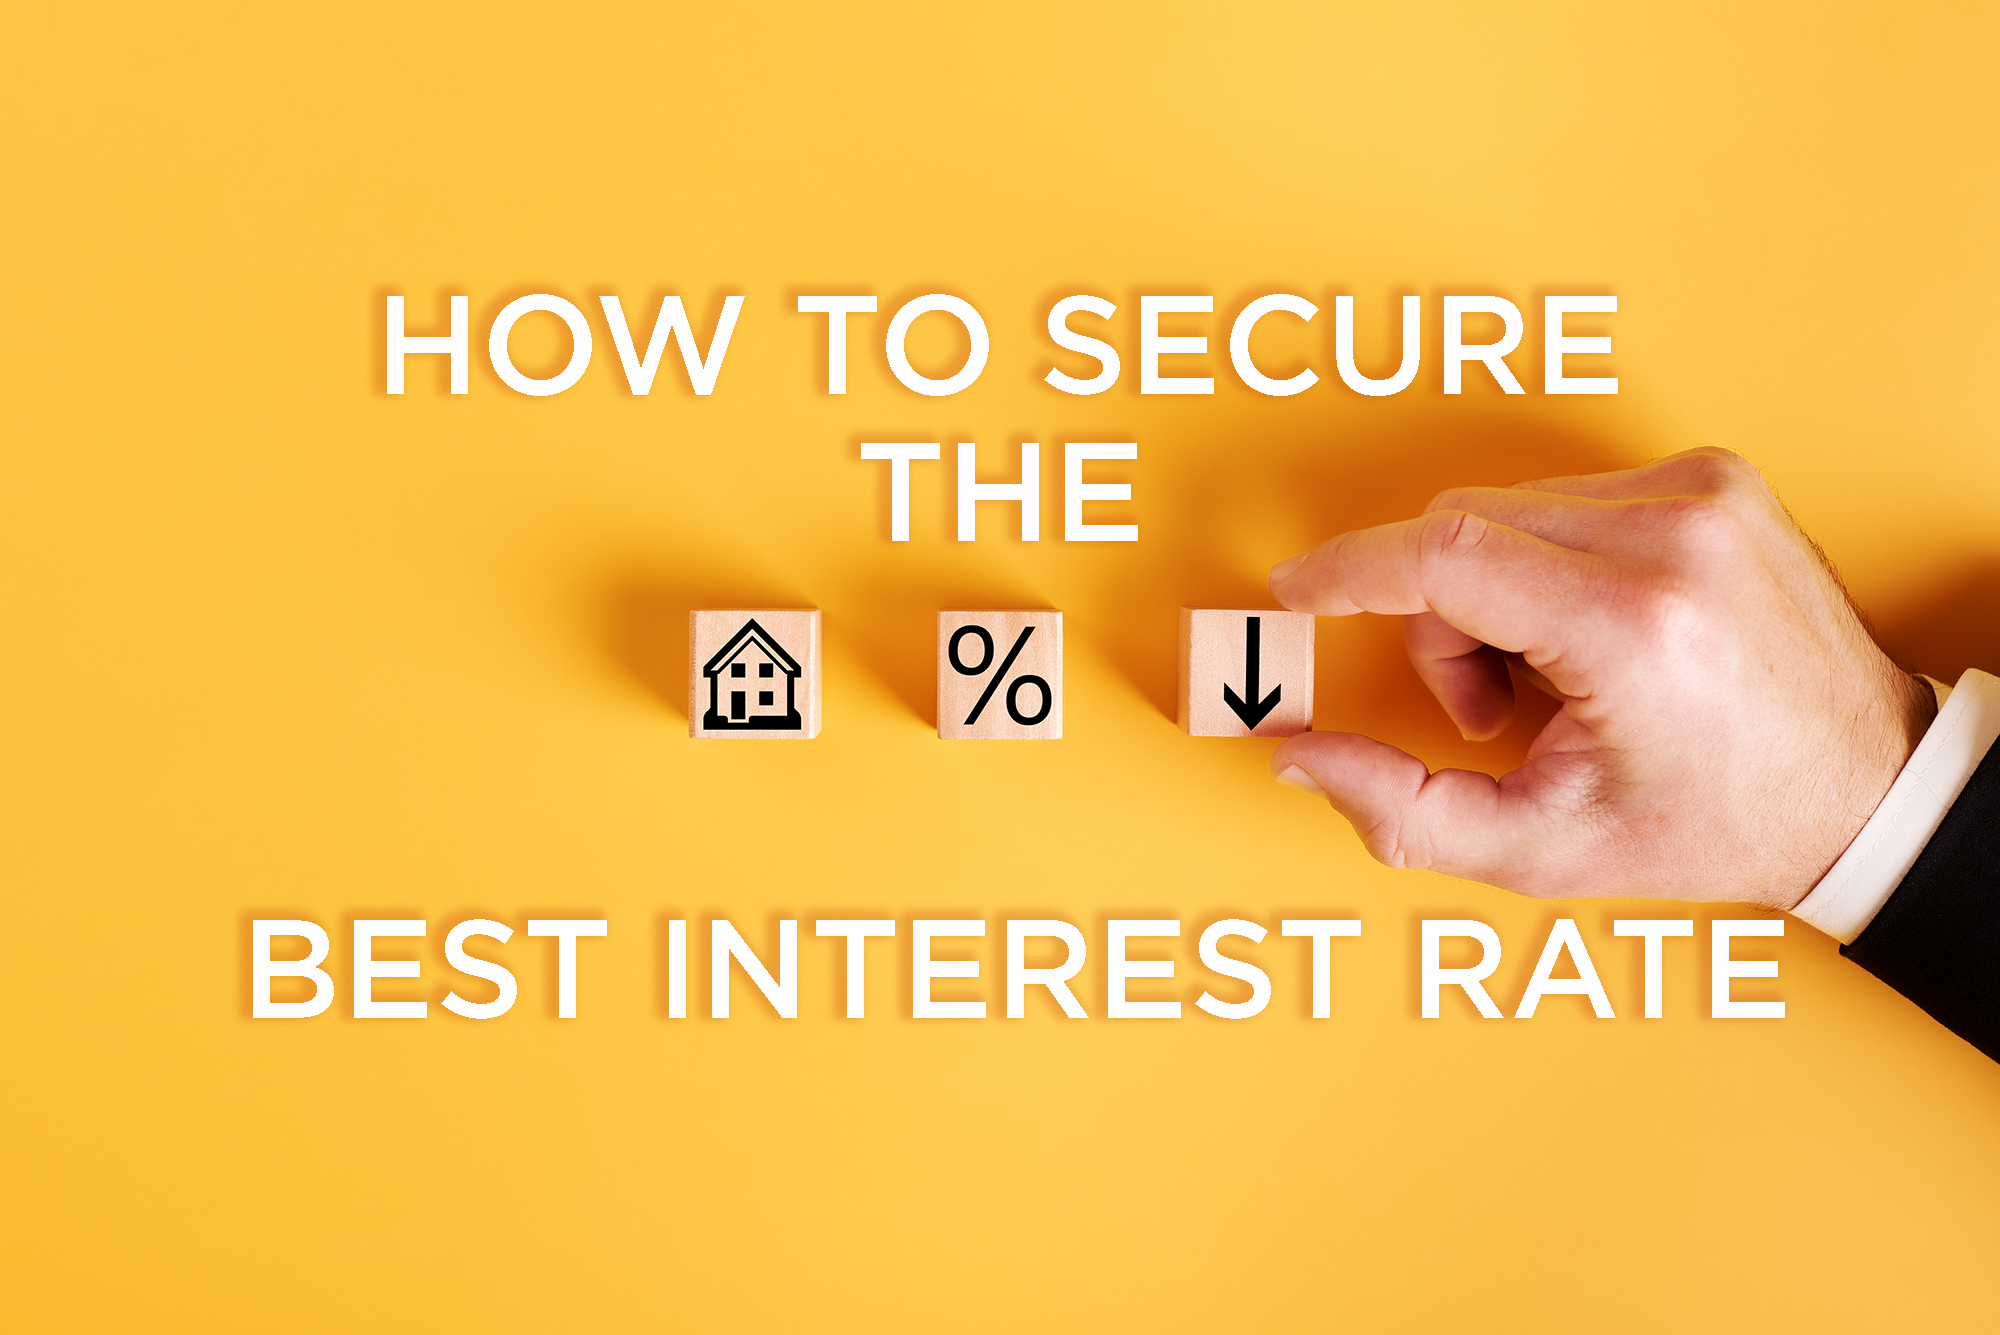 How to Secure the Best Interest Rate